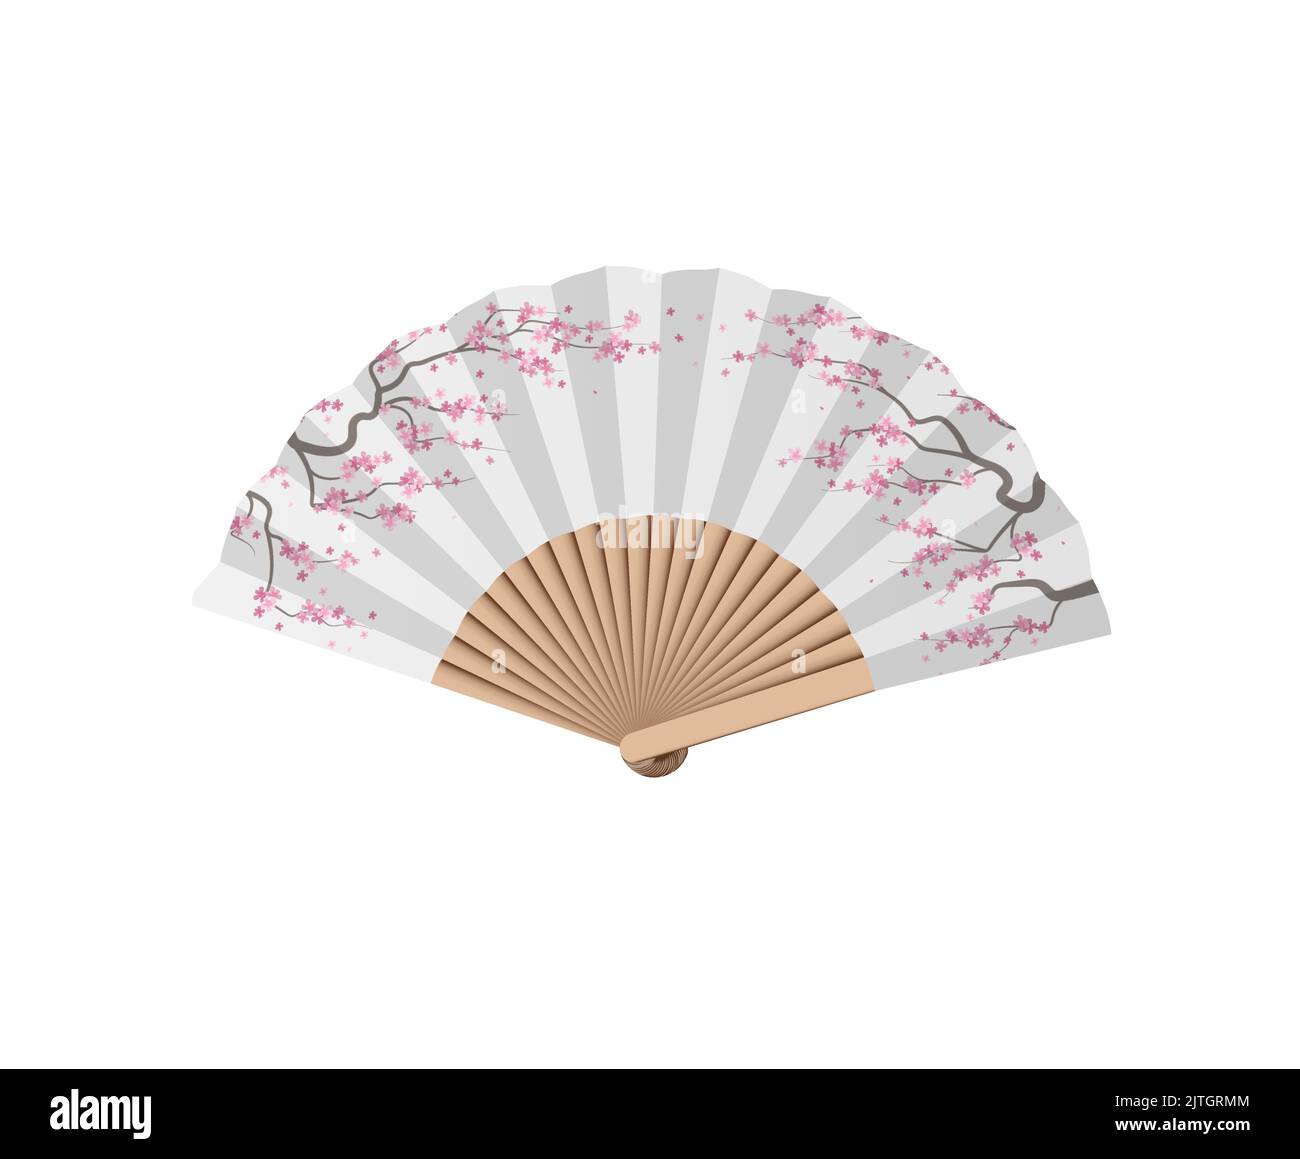 Chinese Bamboo Hand Fan Folded Handfan in Red Plum Flower Graphic Design 